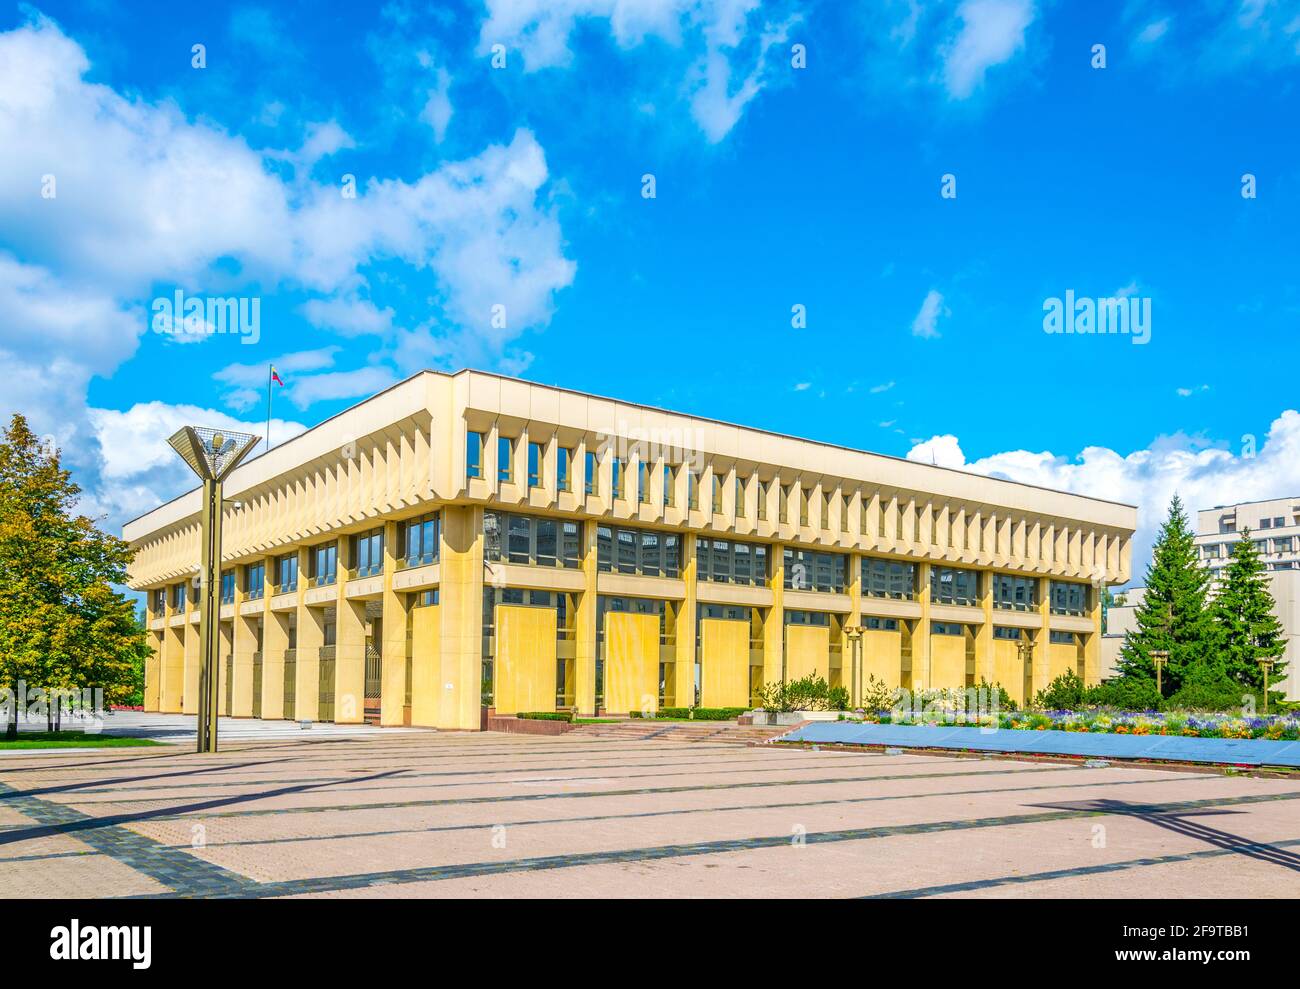 xBSeimas Palace used as a parliament building in Vilnius, Lithuania Stock Photo